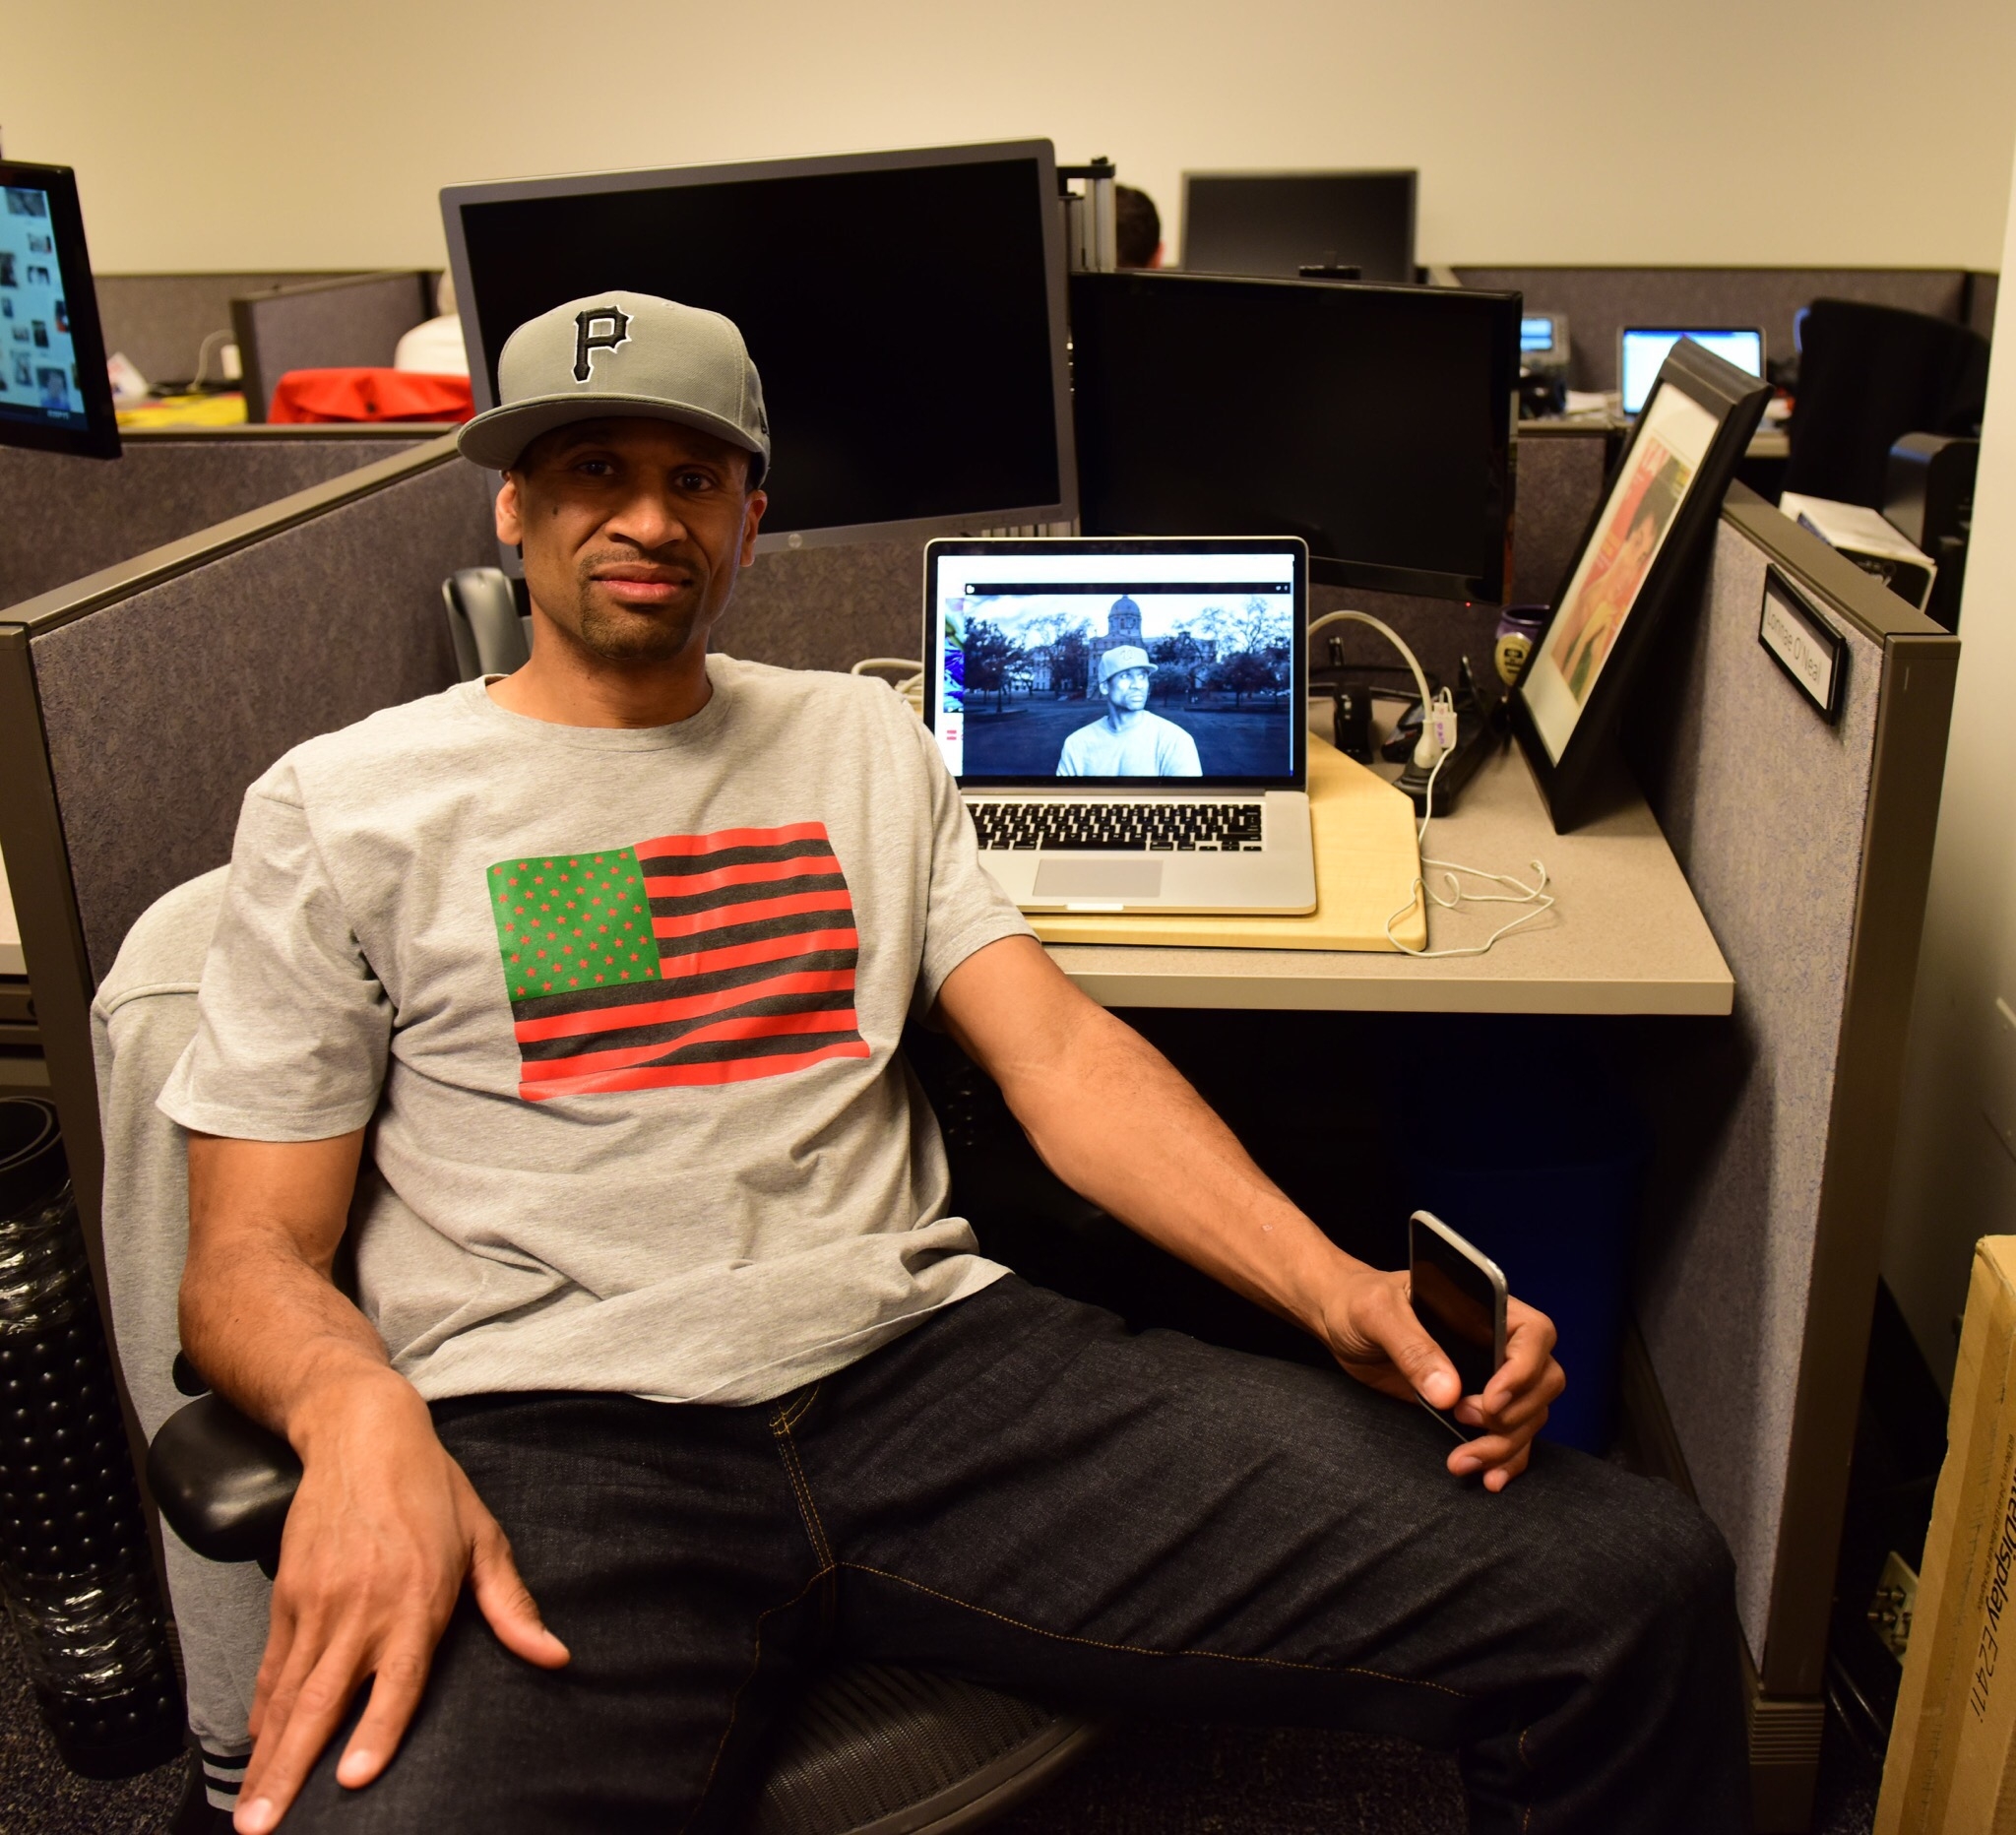 Jesse Washington in the office of The Undefeated with "The Waco Horror" open on laptop behind him. (Kea Taylor/ESPN Images)